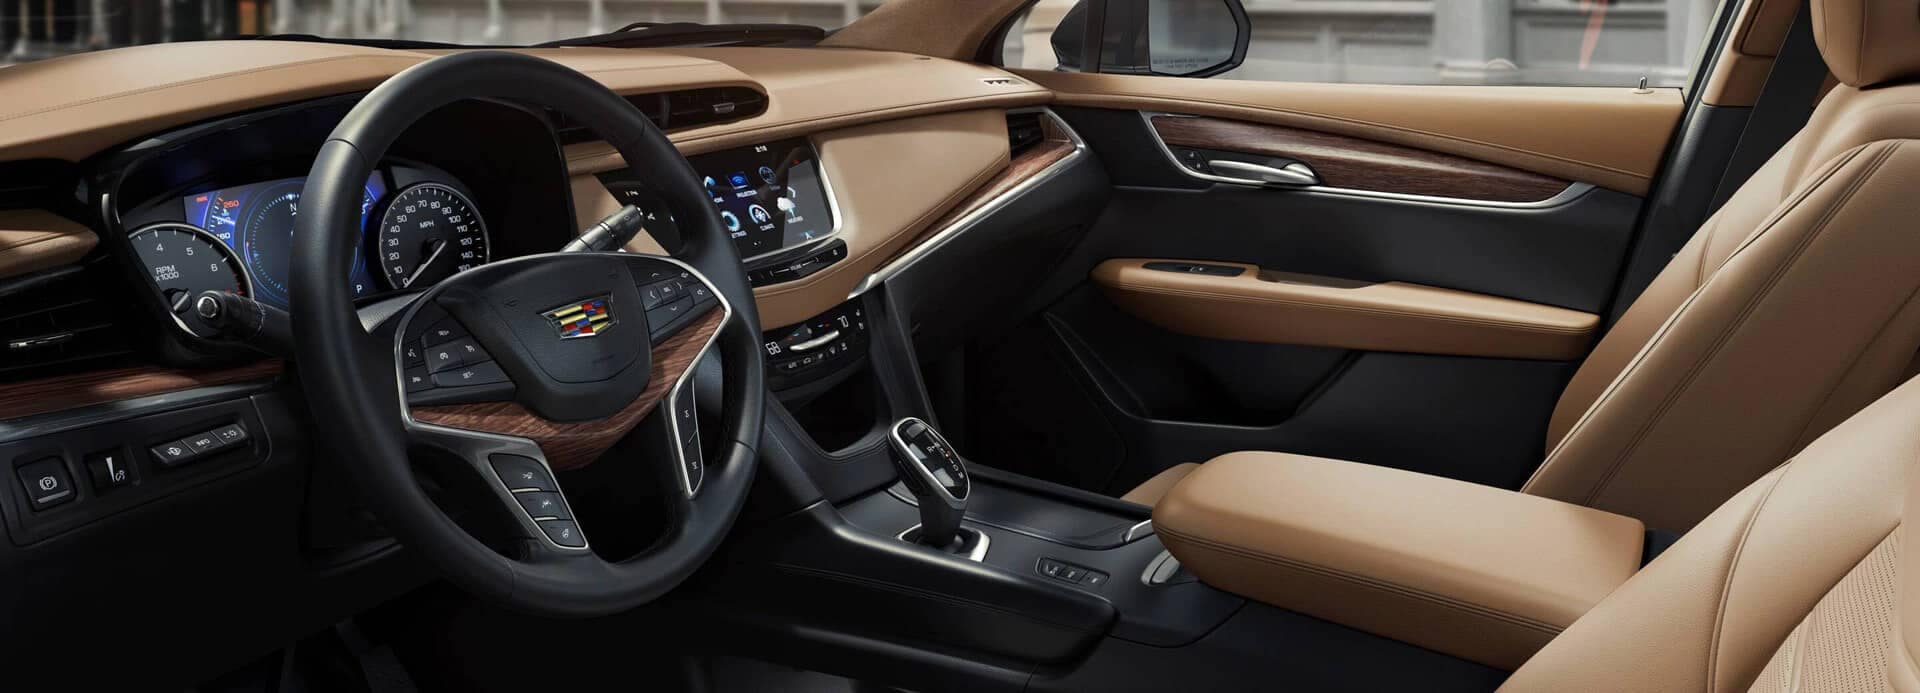 2020 Cadillac Interior | XT5 Interior Options & Packages